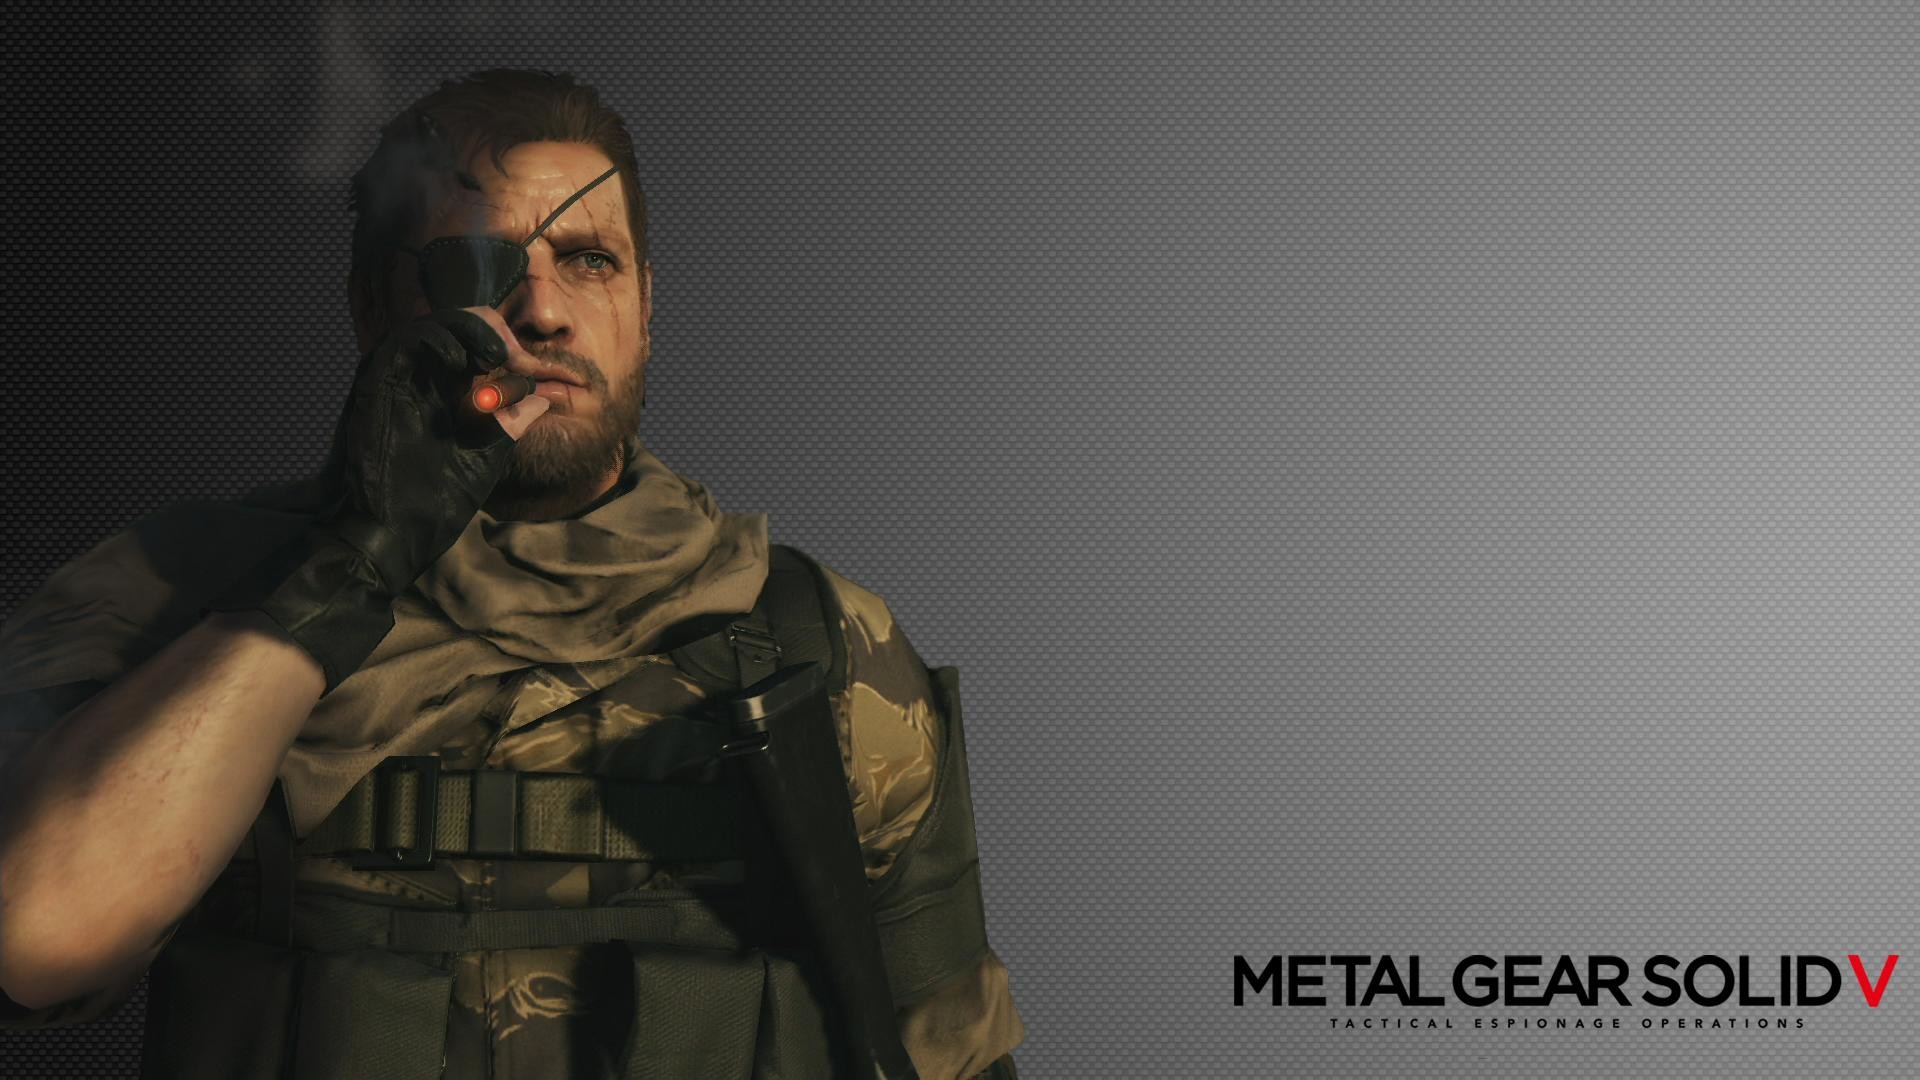 Mgs5 Iphone Wallpaper 75 Images